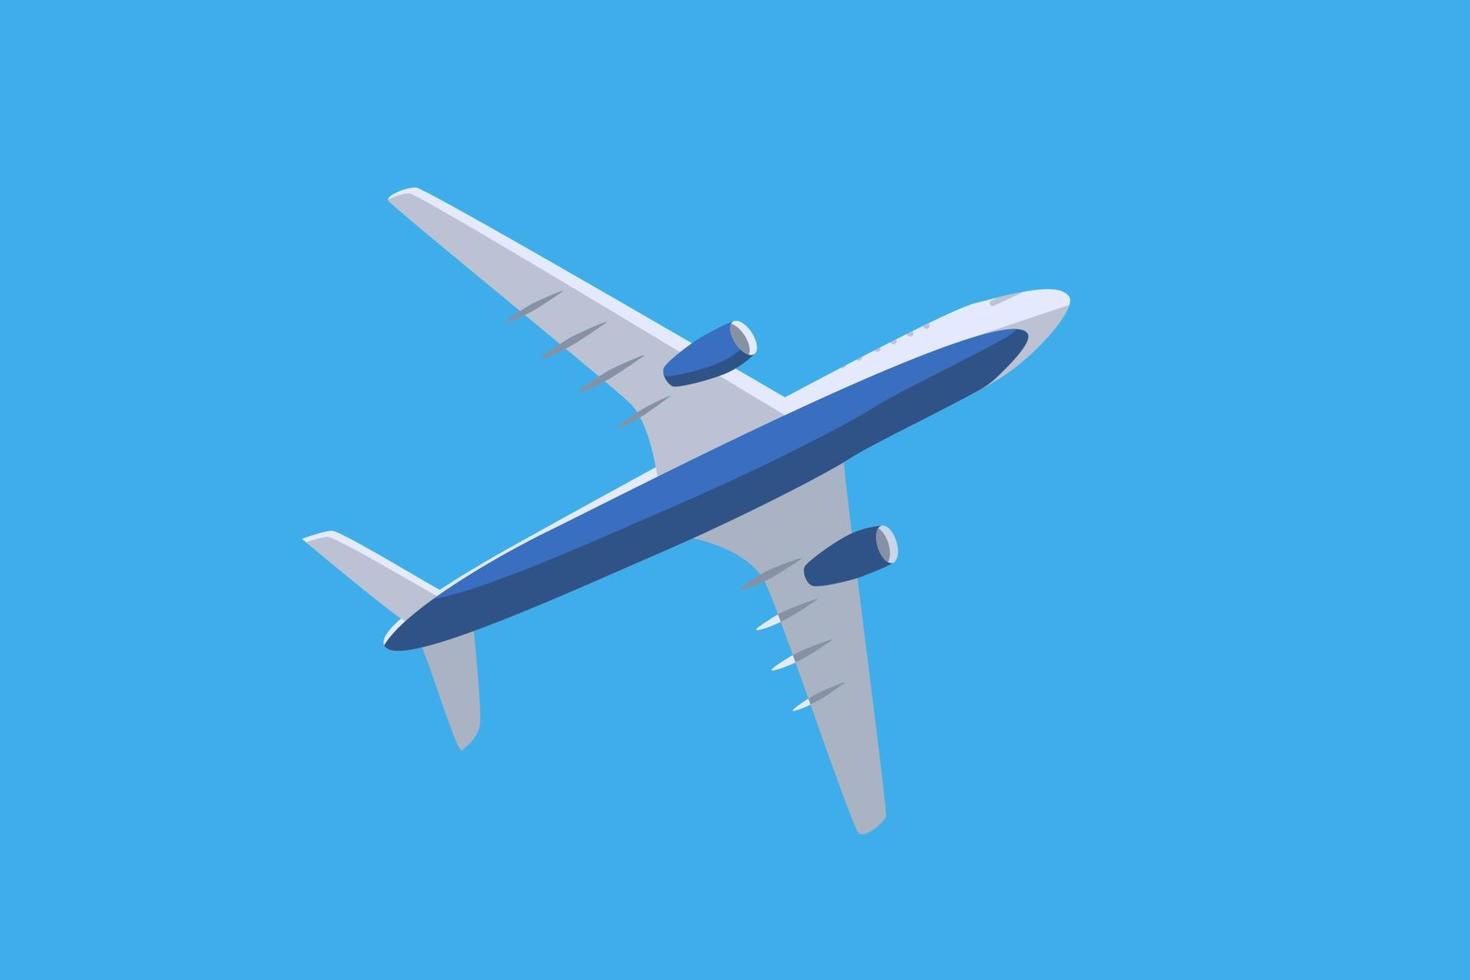 Passenger plane in flight on a blue background. Vector illustration of an airplane,